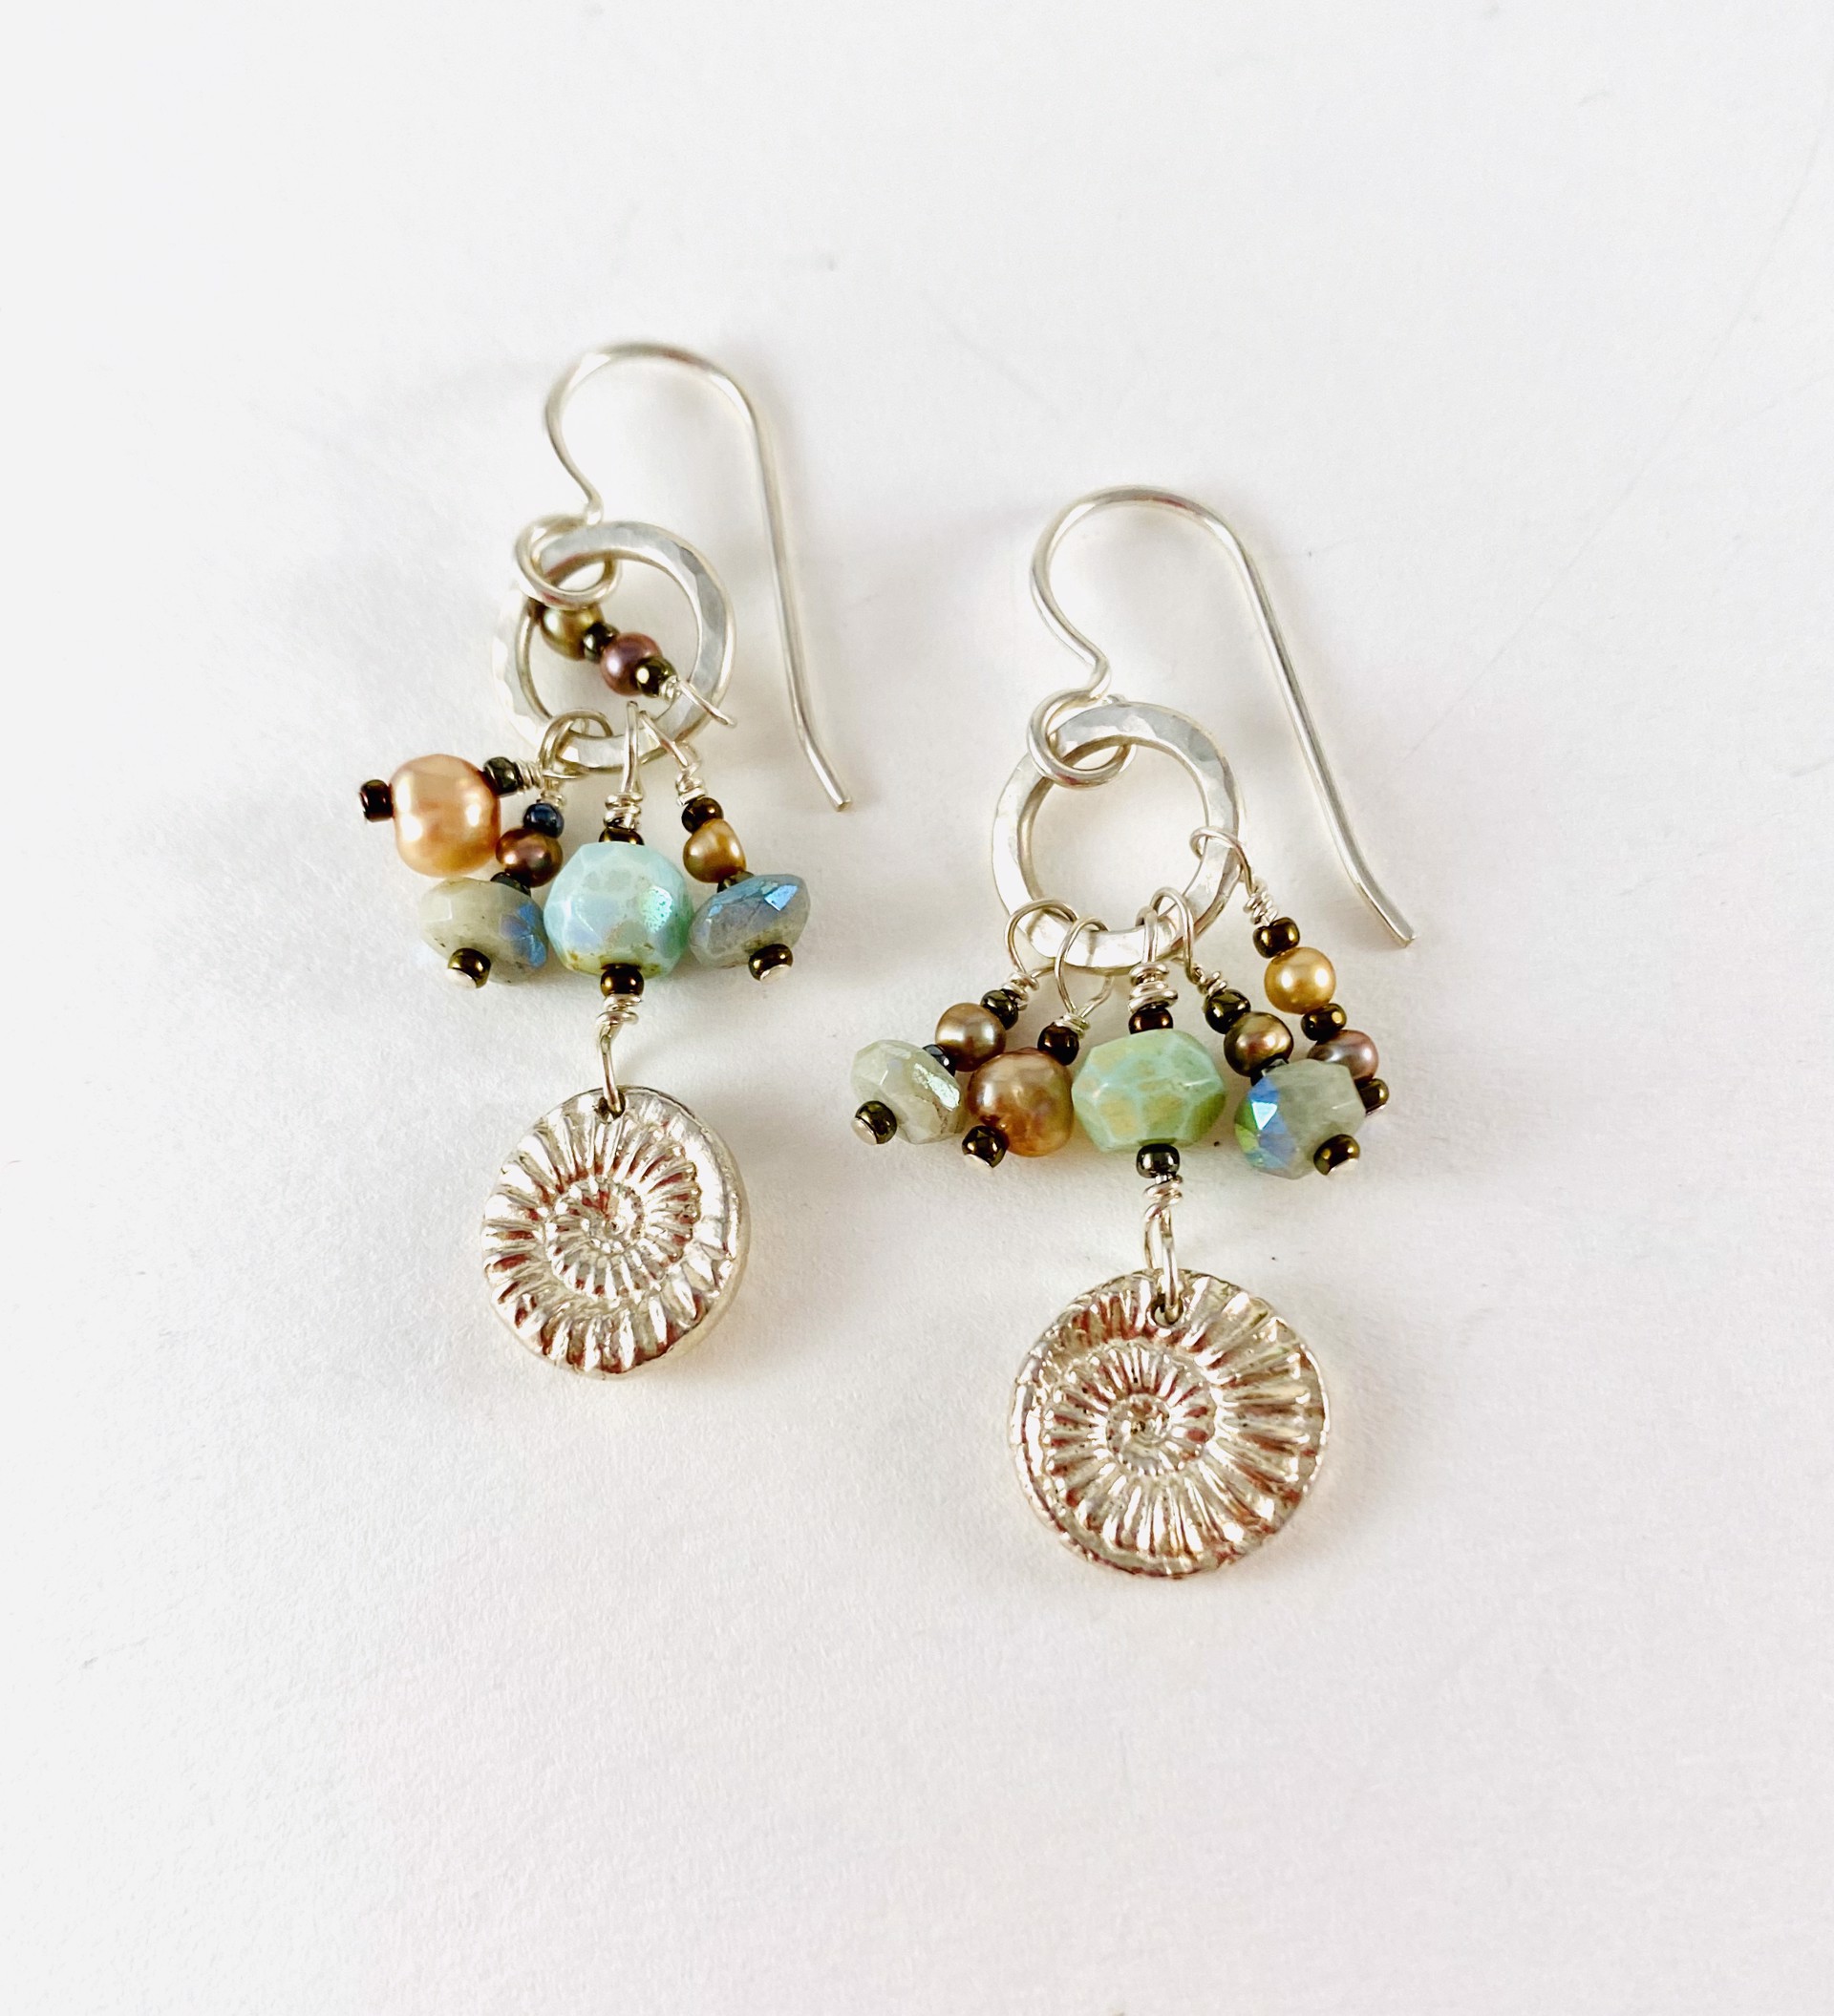 #386 Fine Silver "Fossil" Charm, Pearl, Faceted Bead Earrings by Linda Sacra